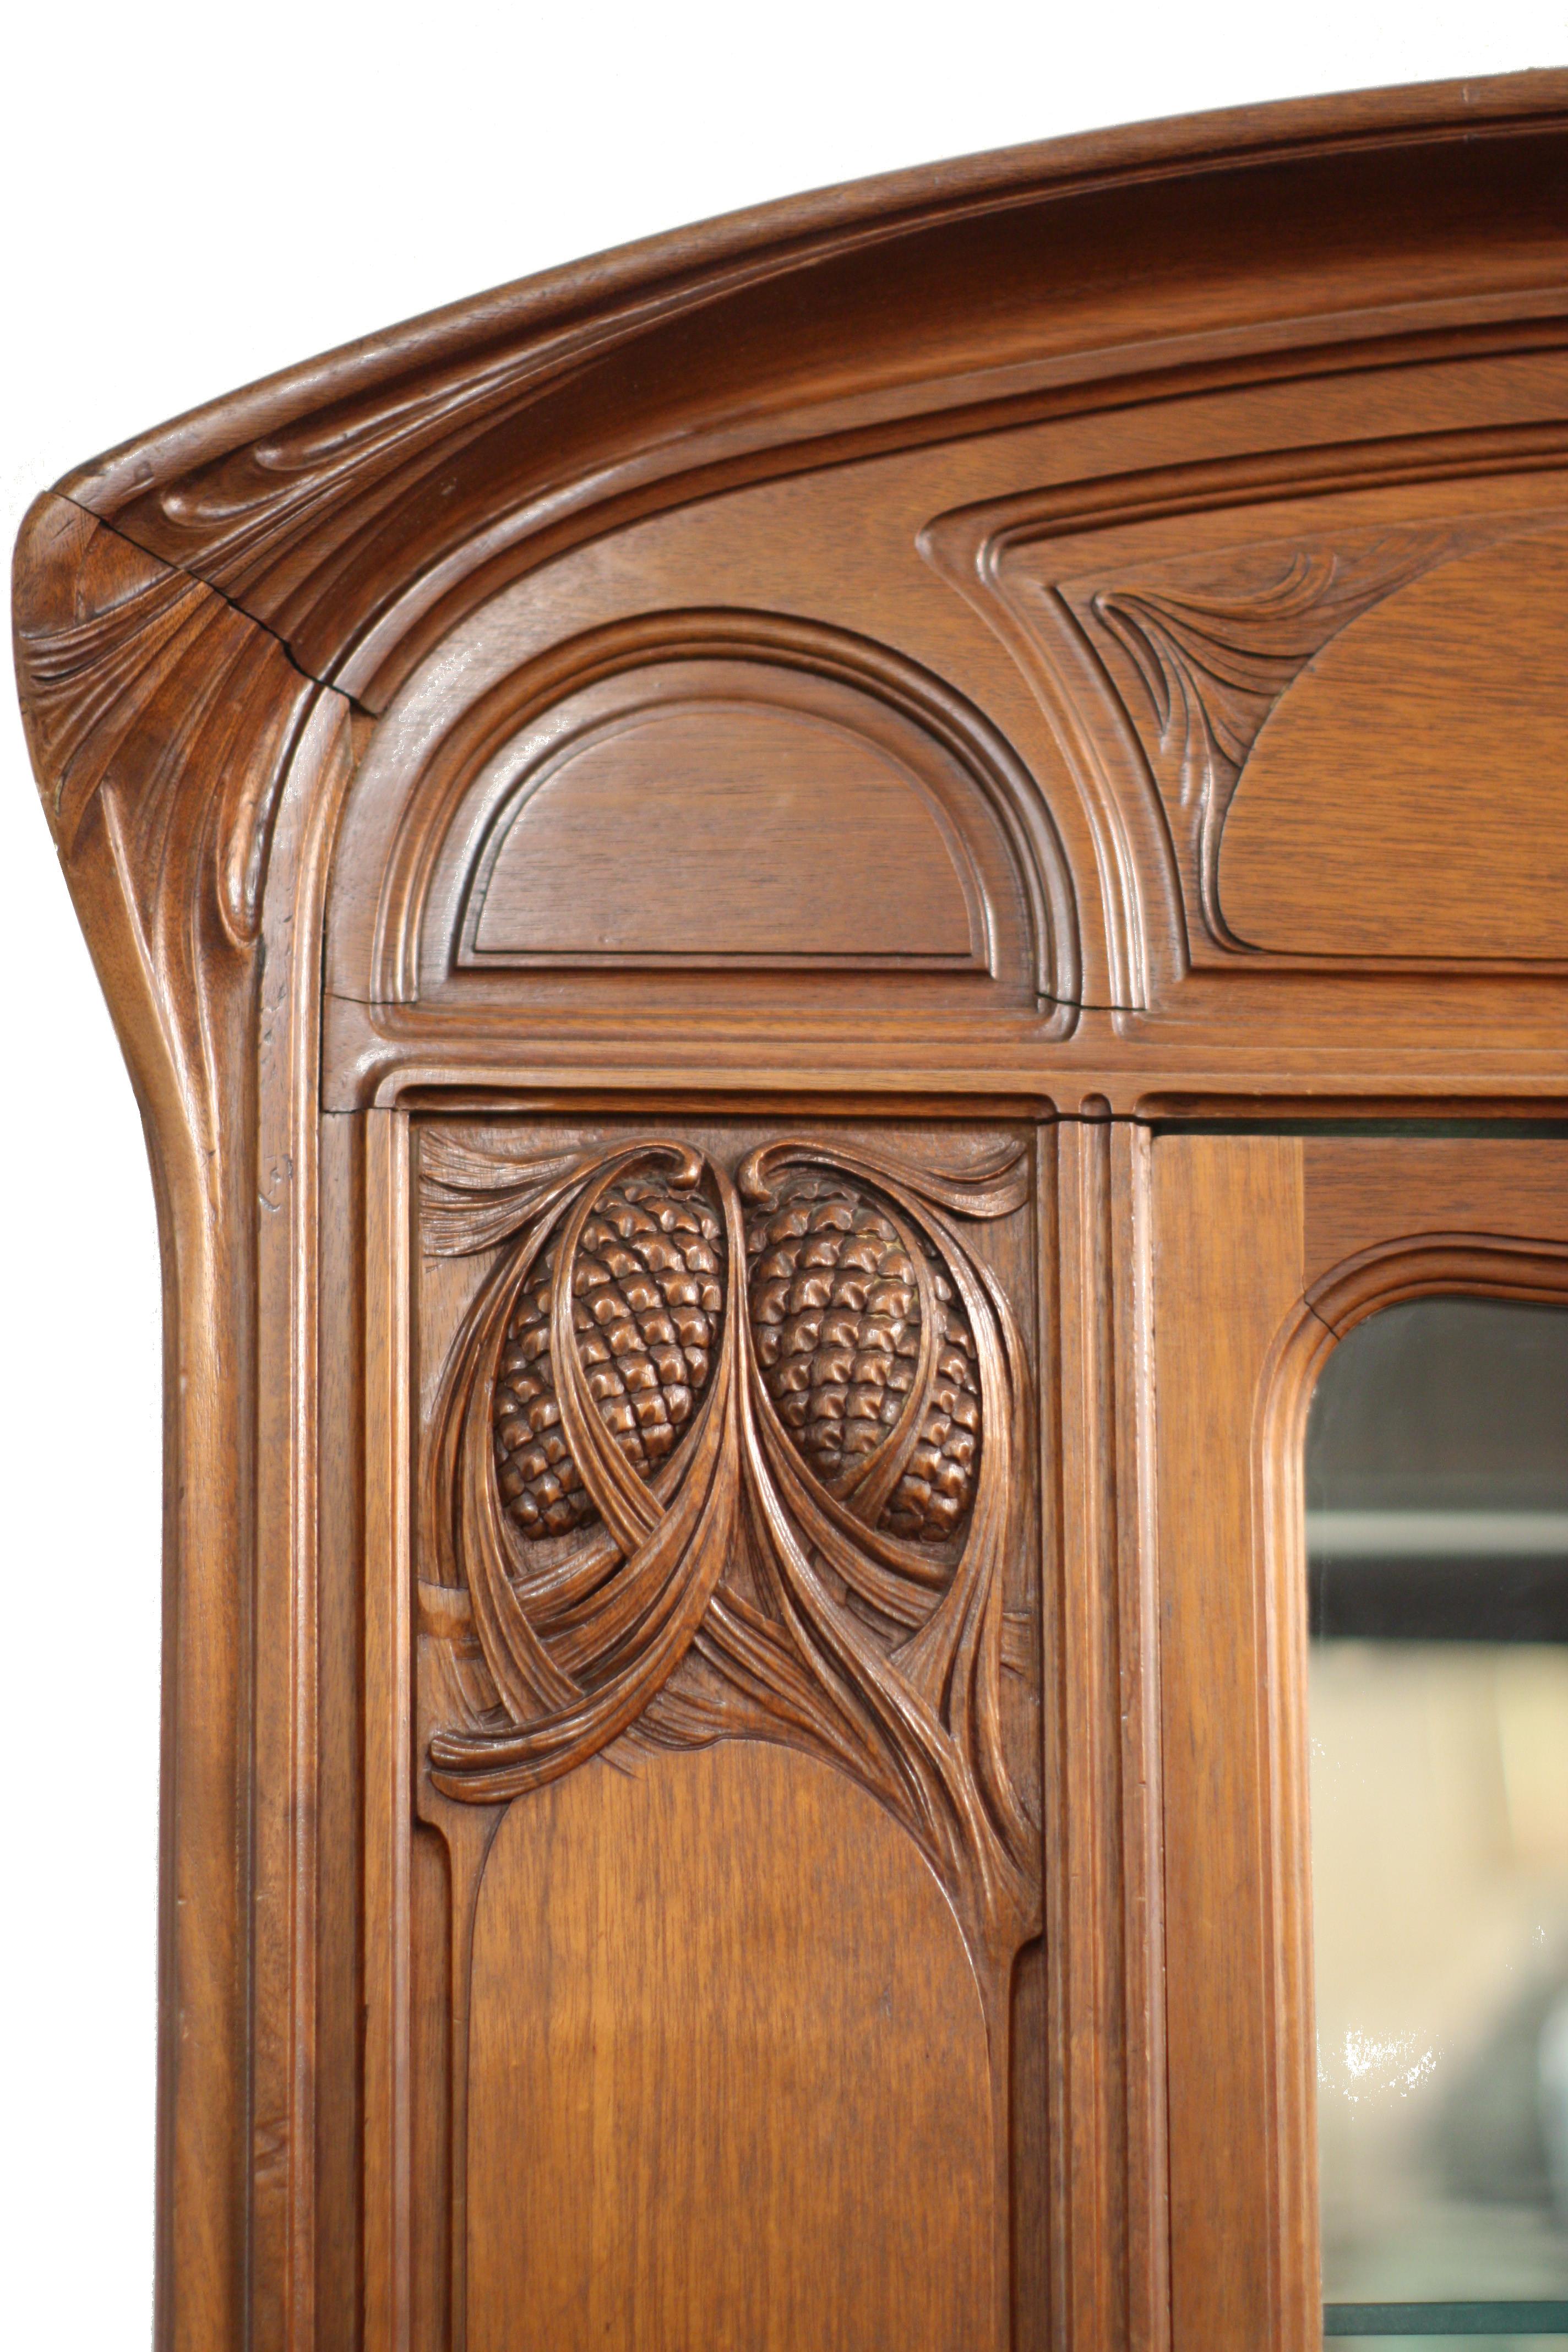 An Art-Nouveau Vienna Secessionist rosewood cabinet, stylized brass pull and keyhole cover.
Measures: Height 90 in. (228.60 cm.), 
Width 51.25 in. (130.17 cm.), 
Depth 20.5 in. (52.07 cm.).
 